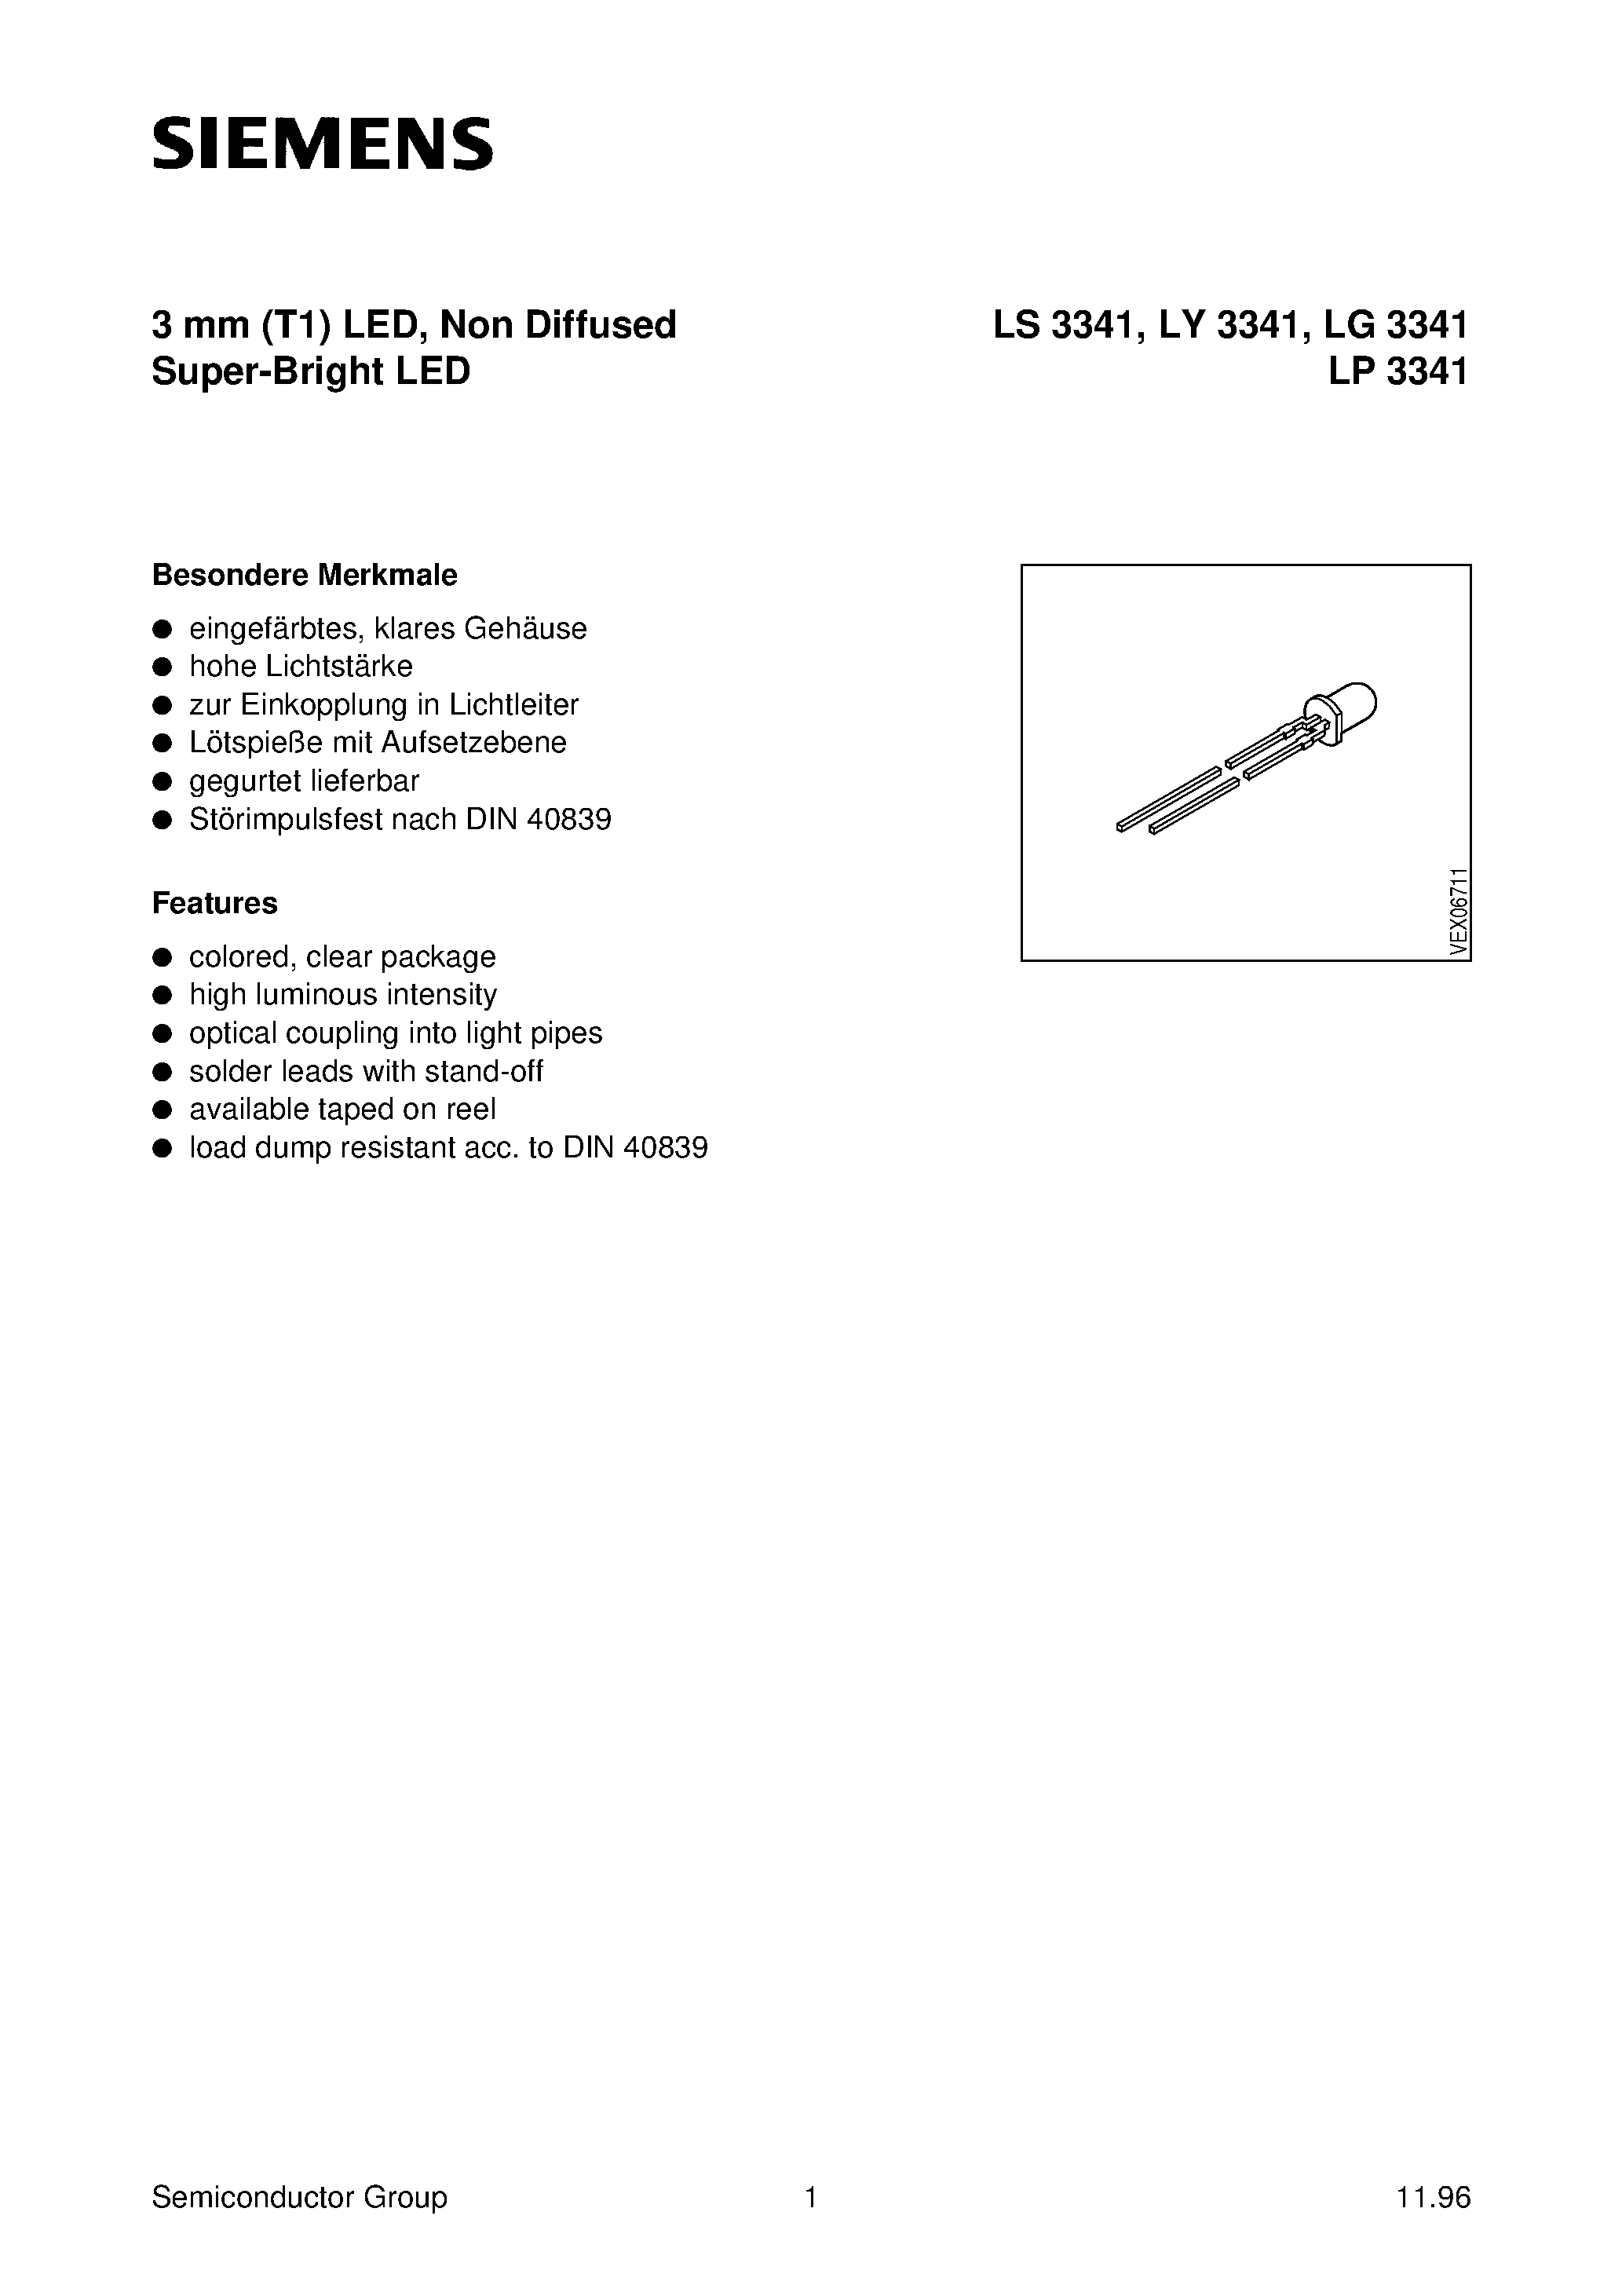 Datasheet LY3341-N - 3 mm T1 LED/ Non Diffused Super-Bright LED page 1